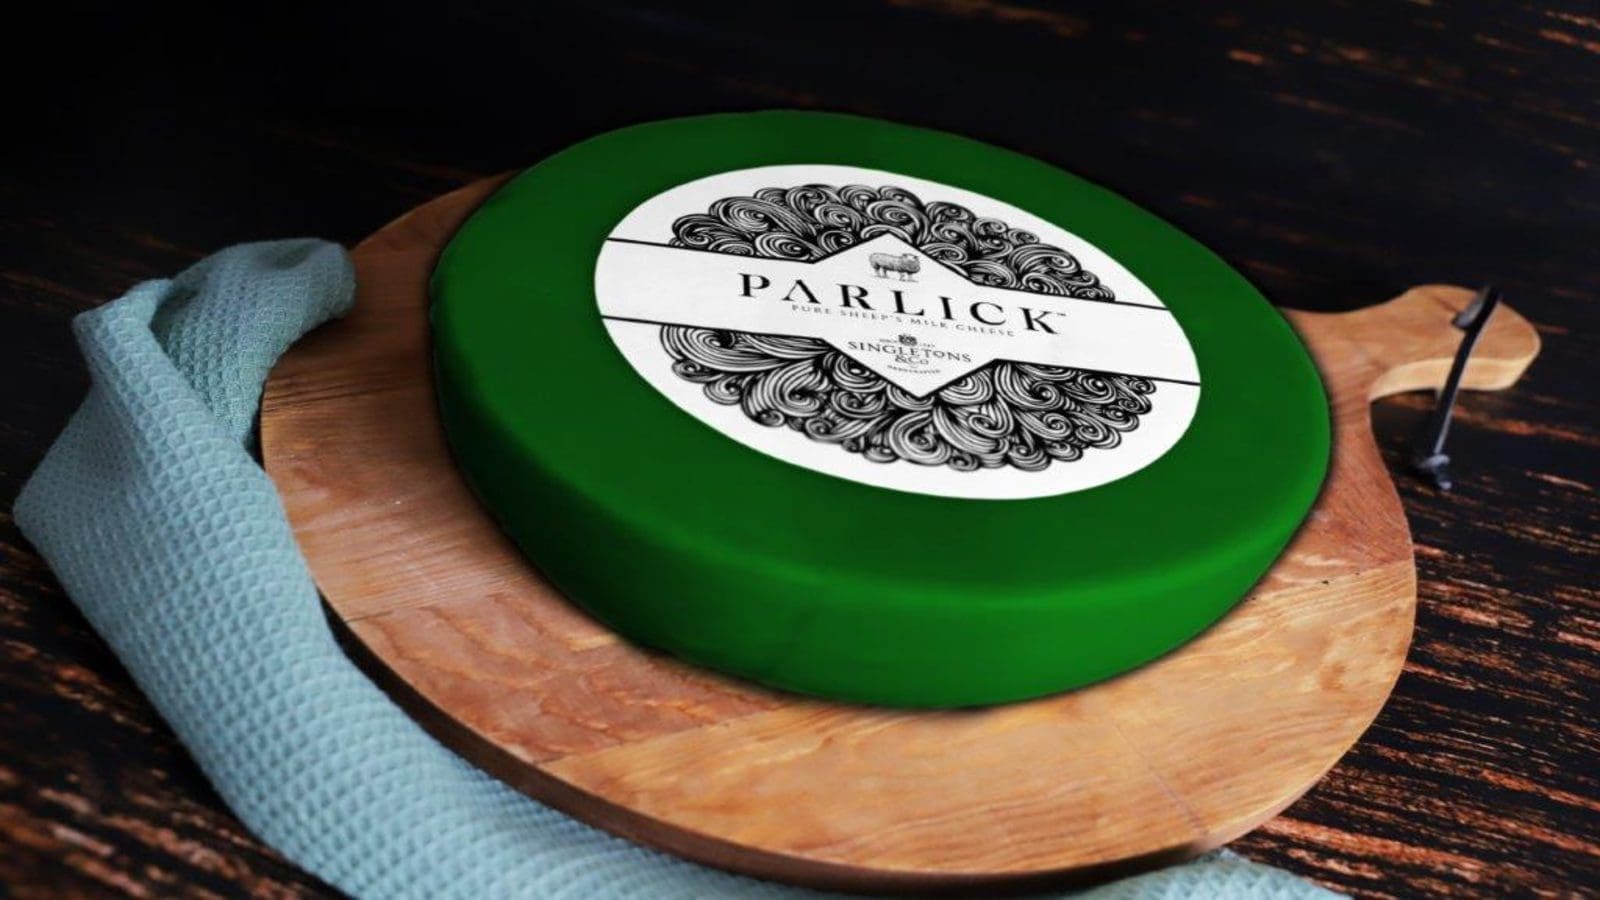 Butlers Farmhouse Cheeses adds sheep’s milk cheese to its portfolio with acquisition of Parlick brand from cheesemaker Singletons